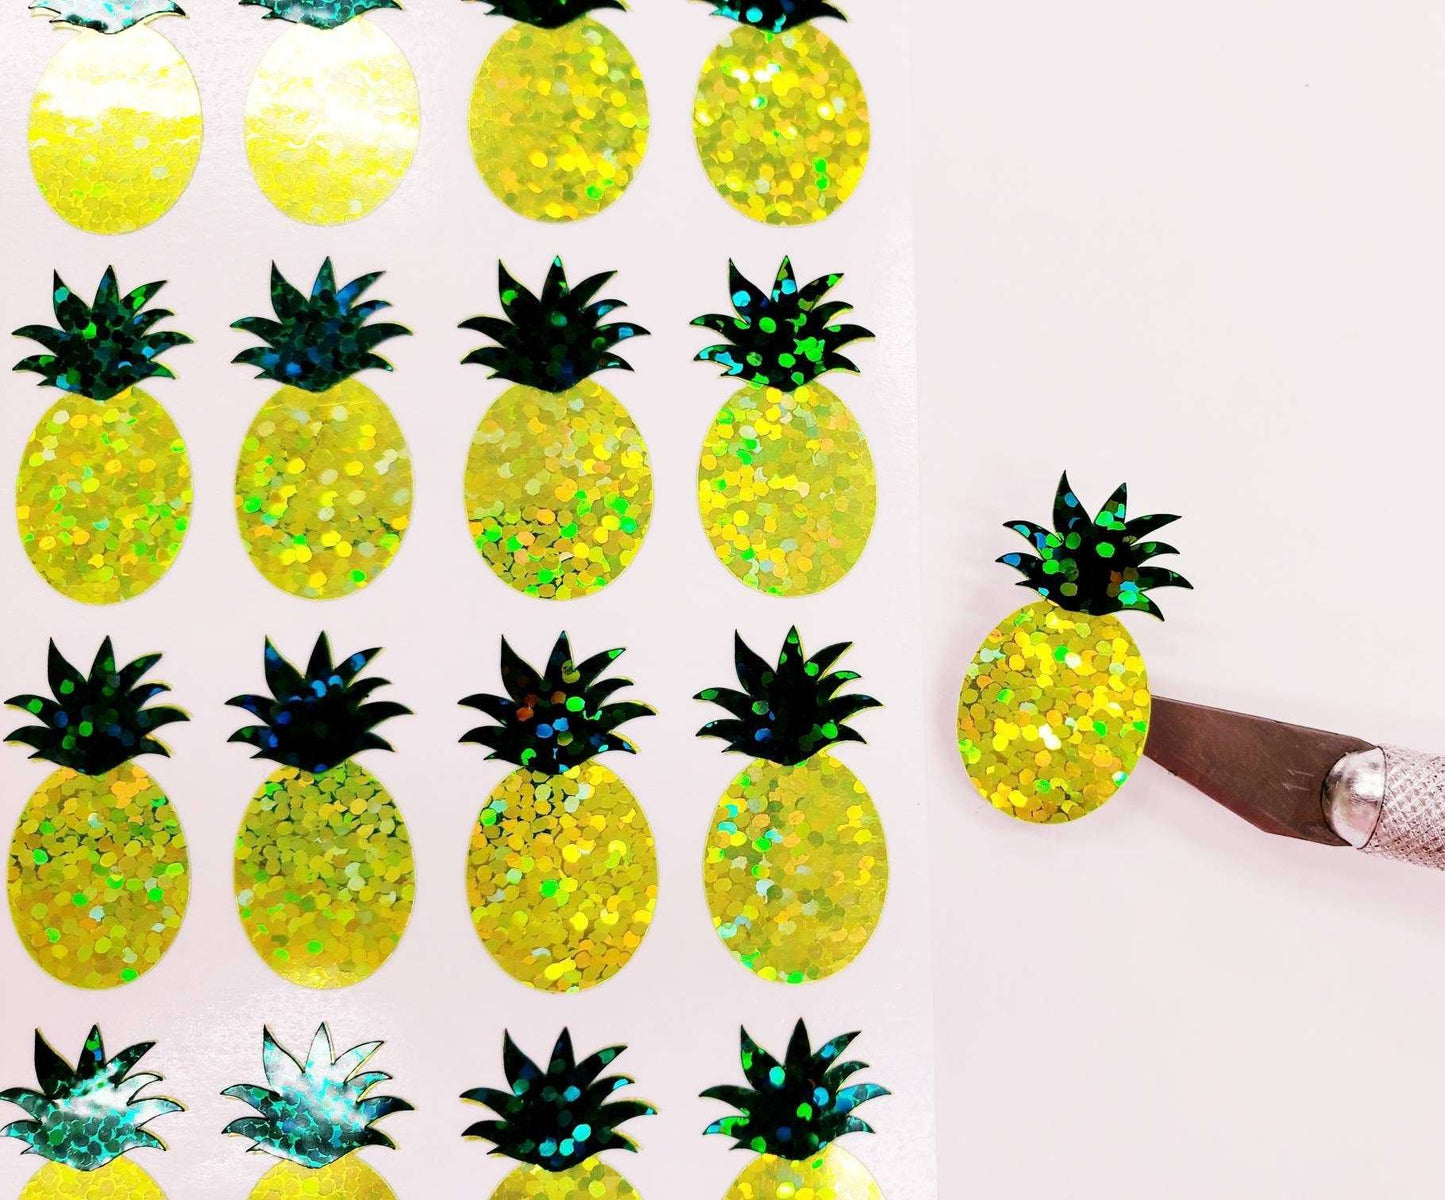 Pineapple Stickers, set of 30 tropical fruit vinyl decals, yellow and green sparkly pineapple drink cup stickers, summer pool party stickers